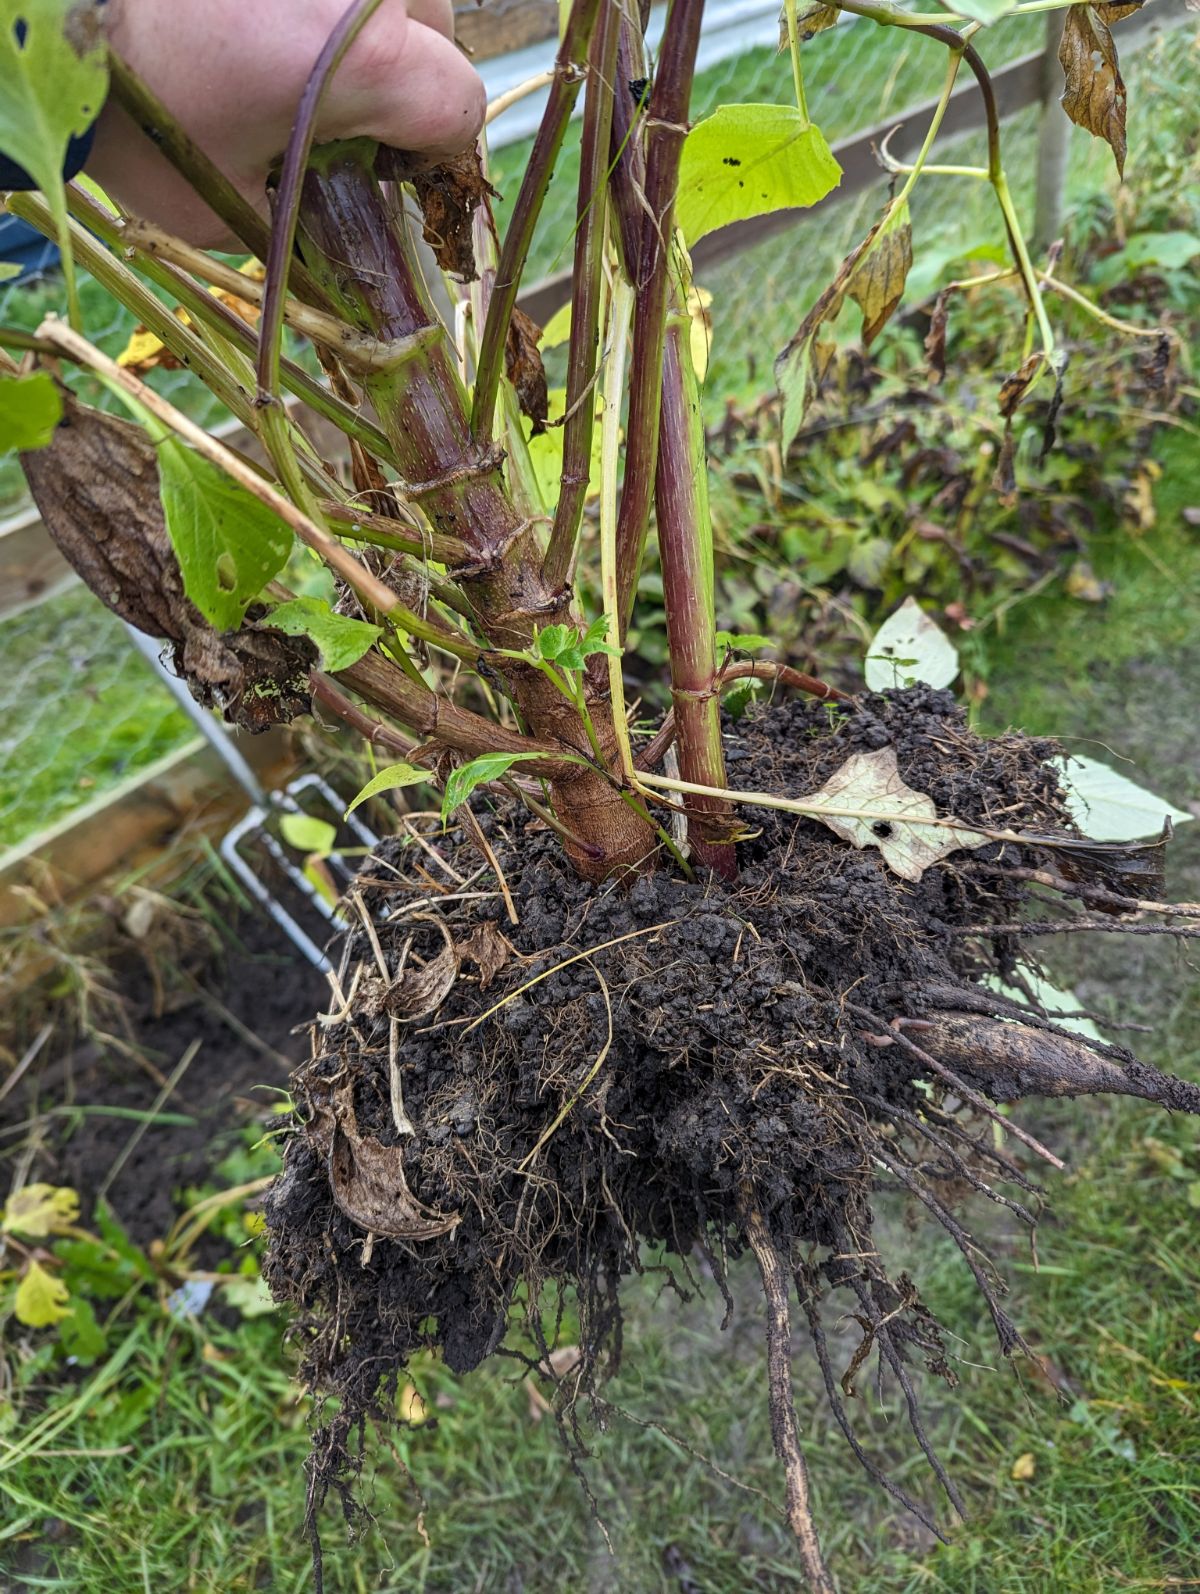 A freshly dug dahlia with soil on the roots